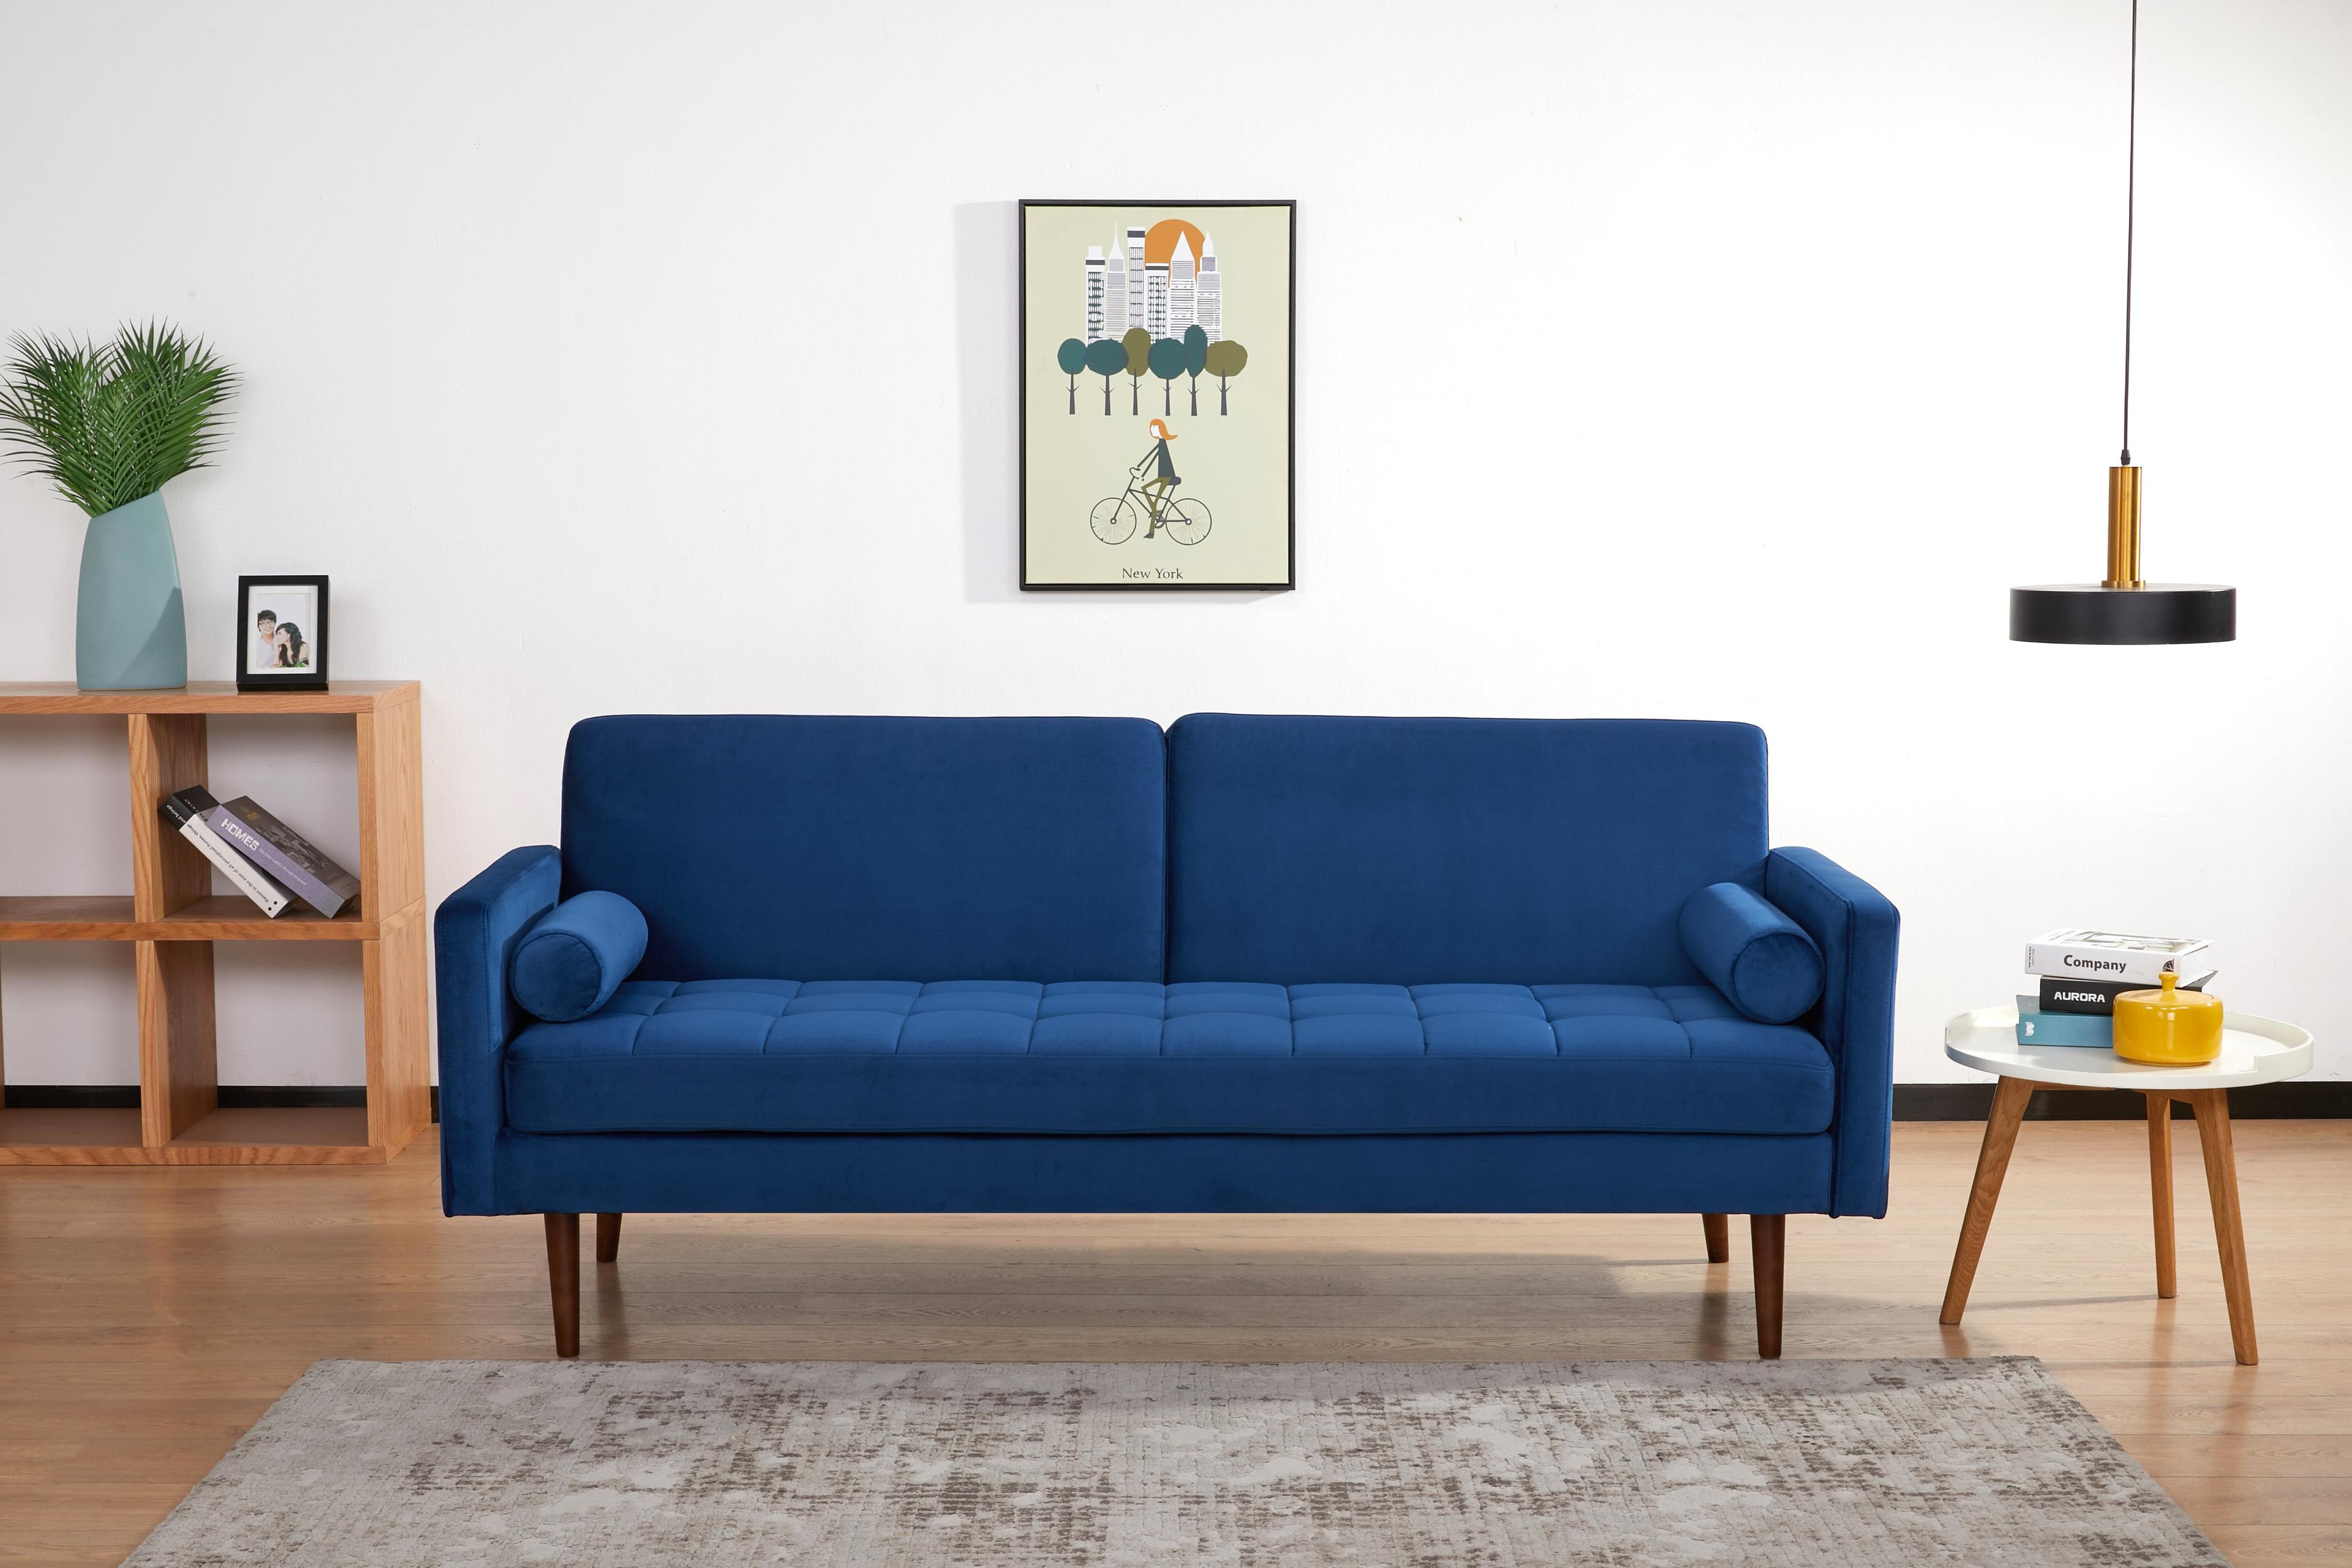 Portland Twin-Size Tufted Velvet Sleeper Sofa in Blue with Wood Accents